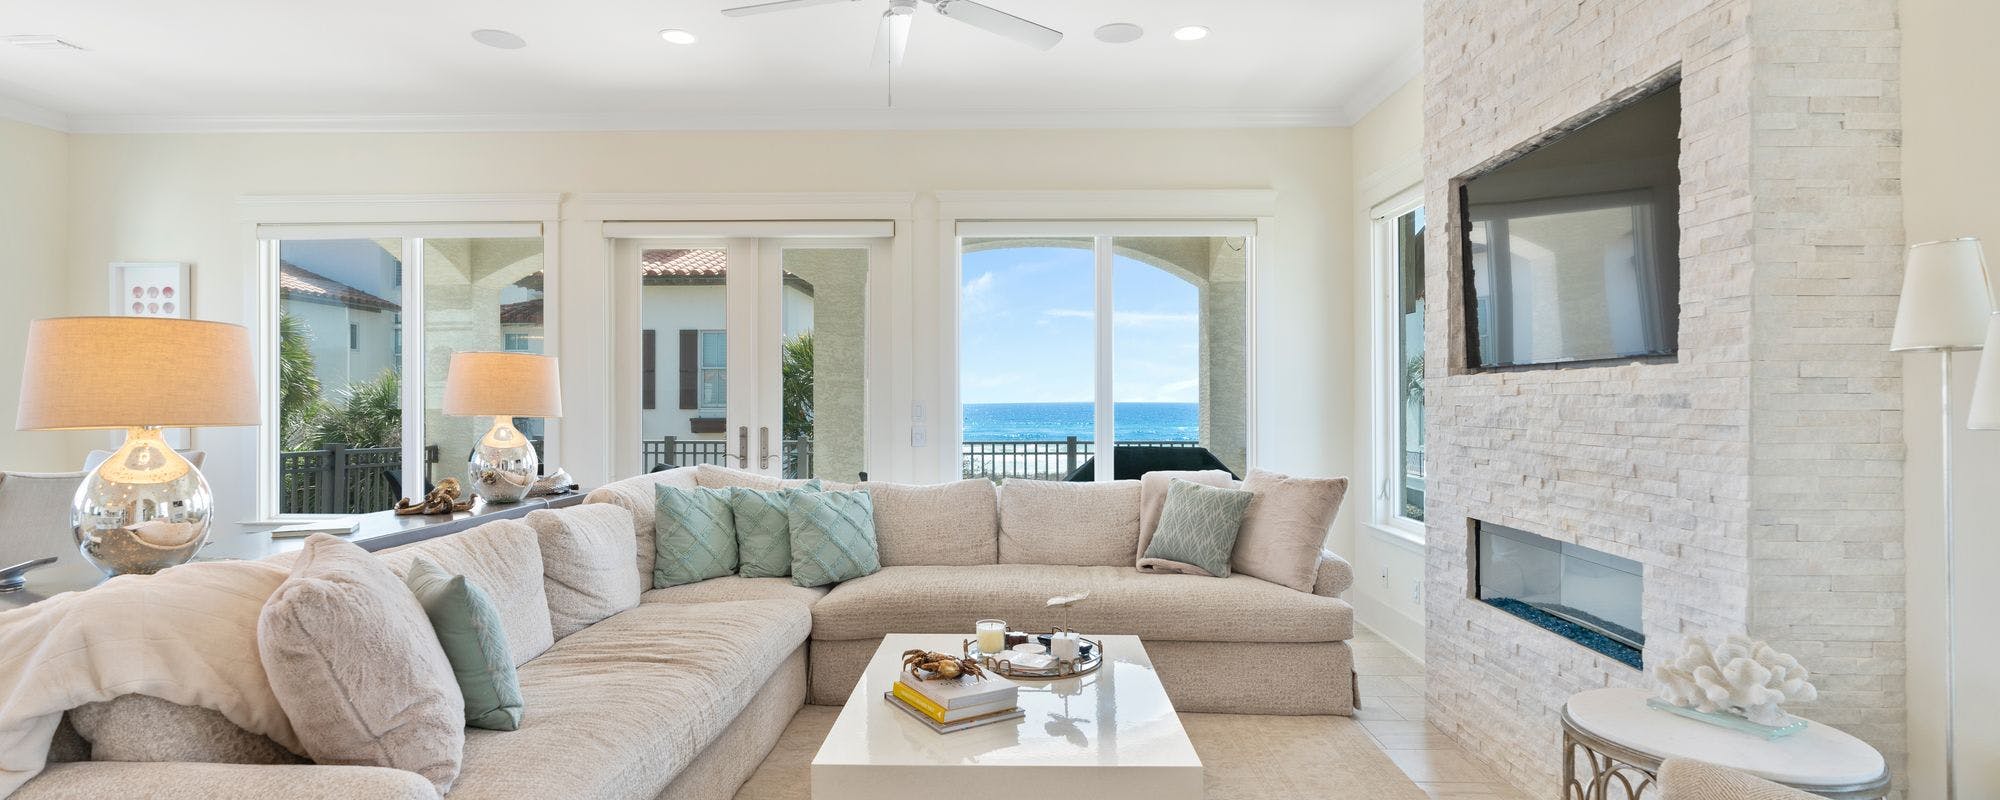 Coastal chic living space in a vacation rental managed by Scenic Stays.